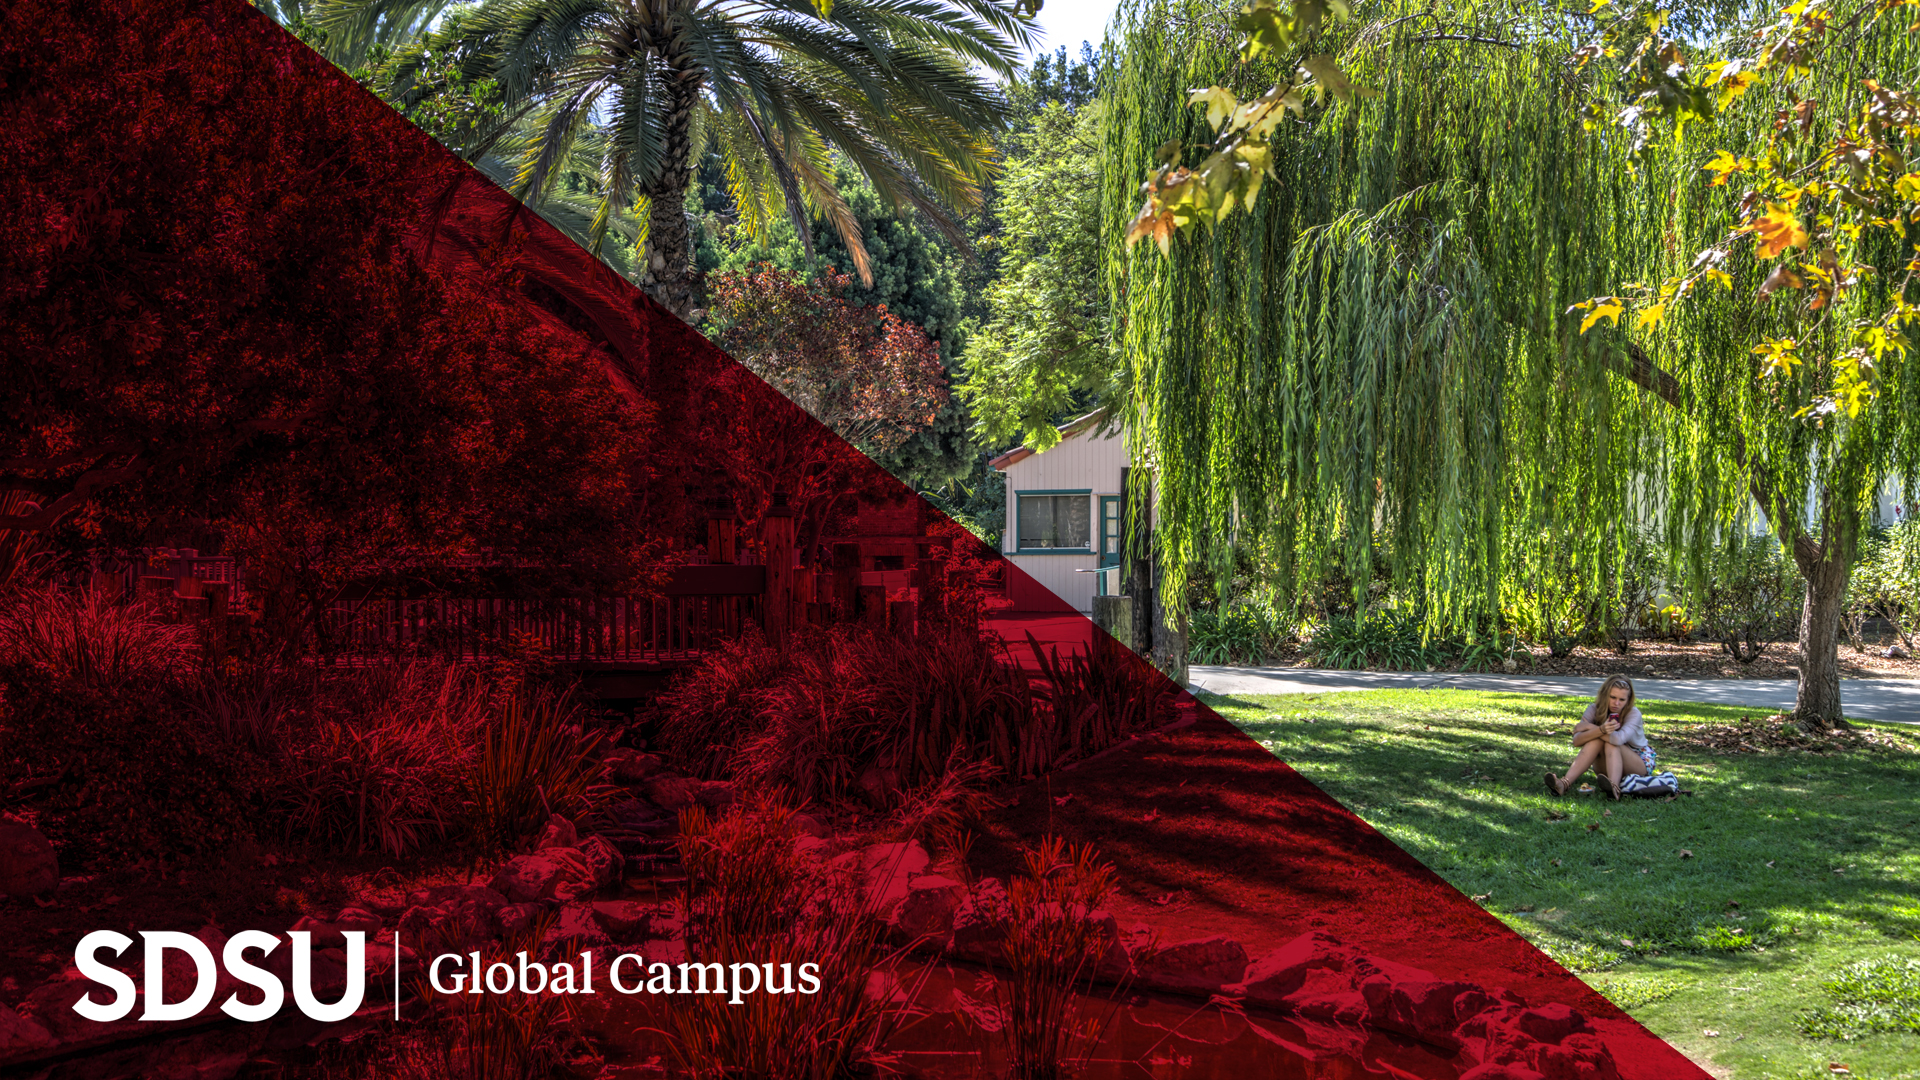 Zoom background with SDSU Global Campus branding